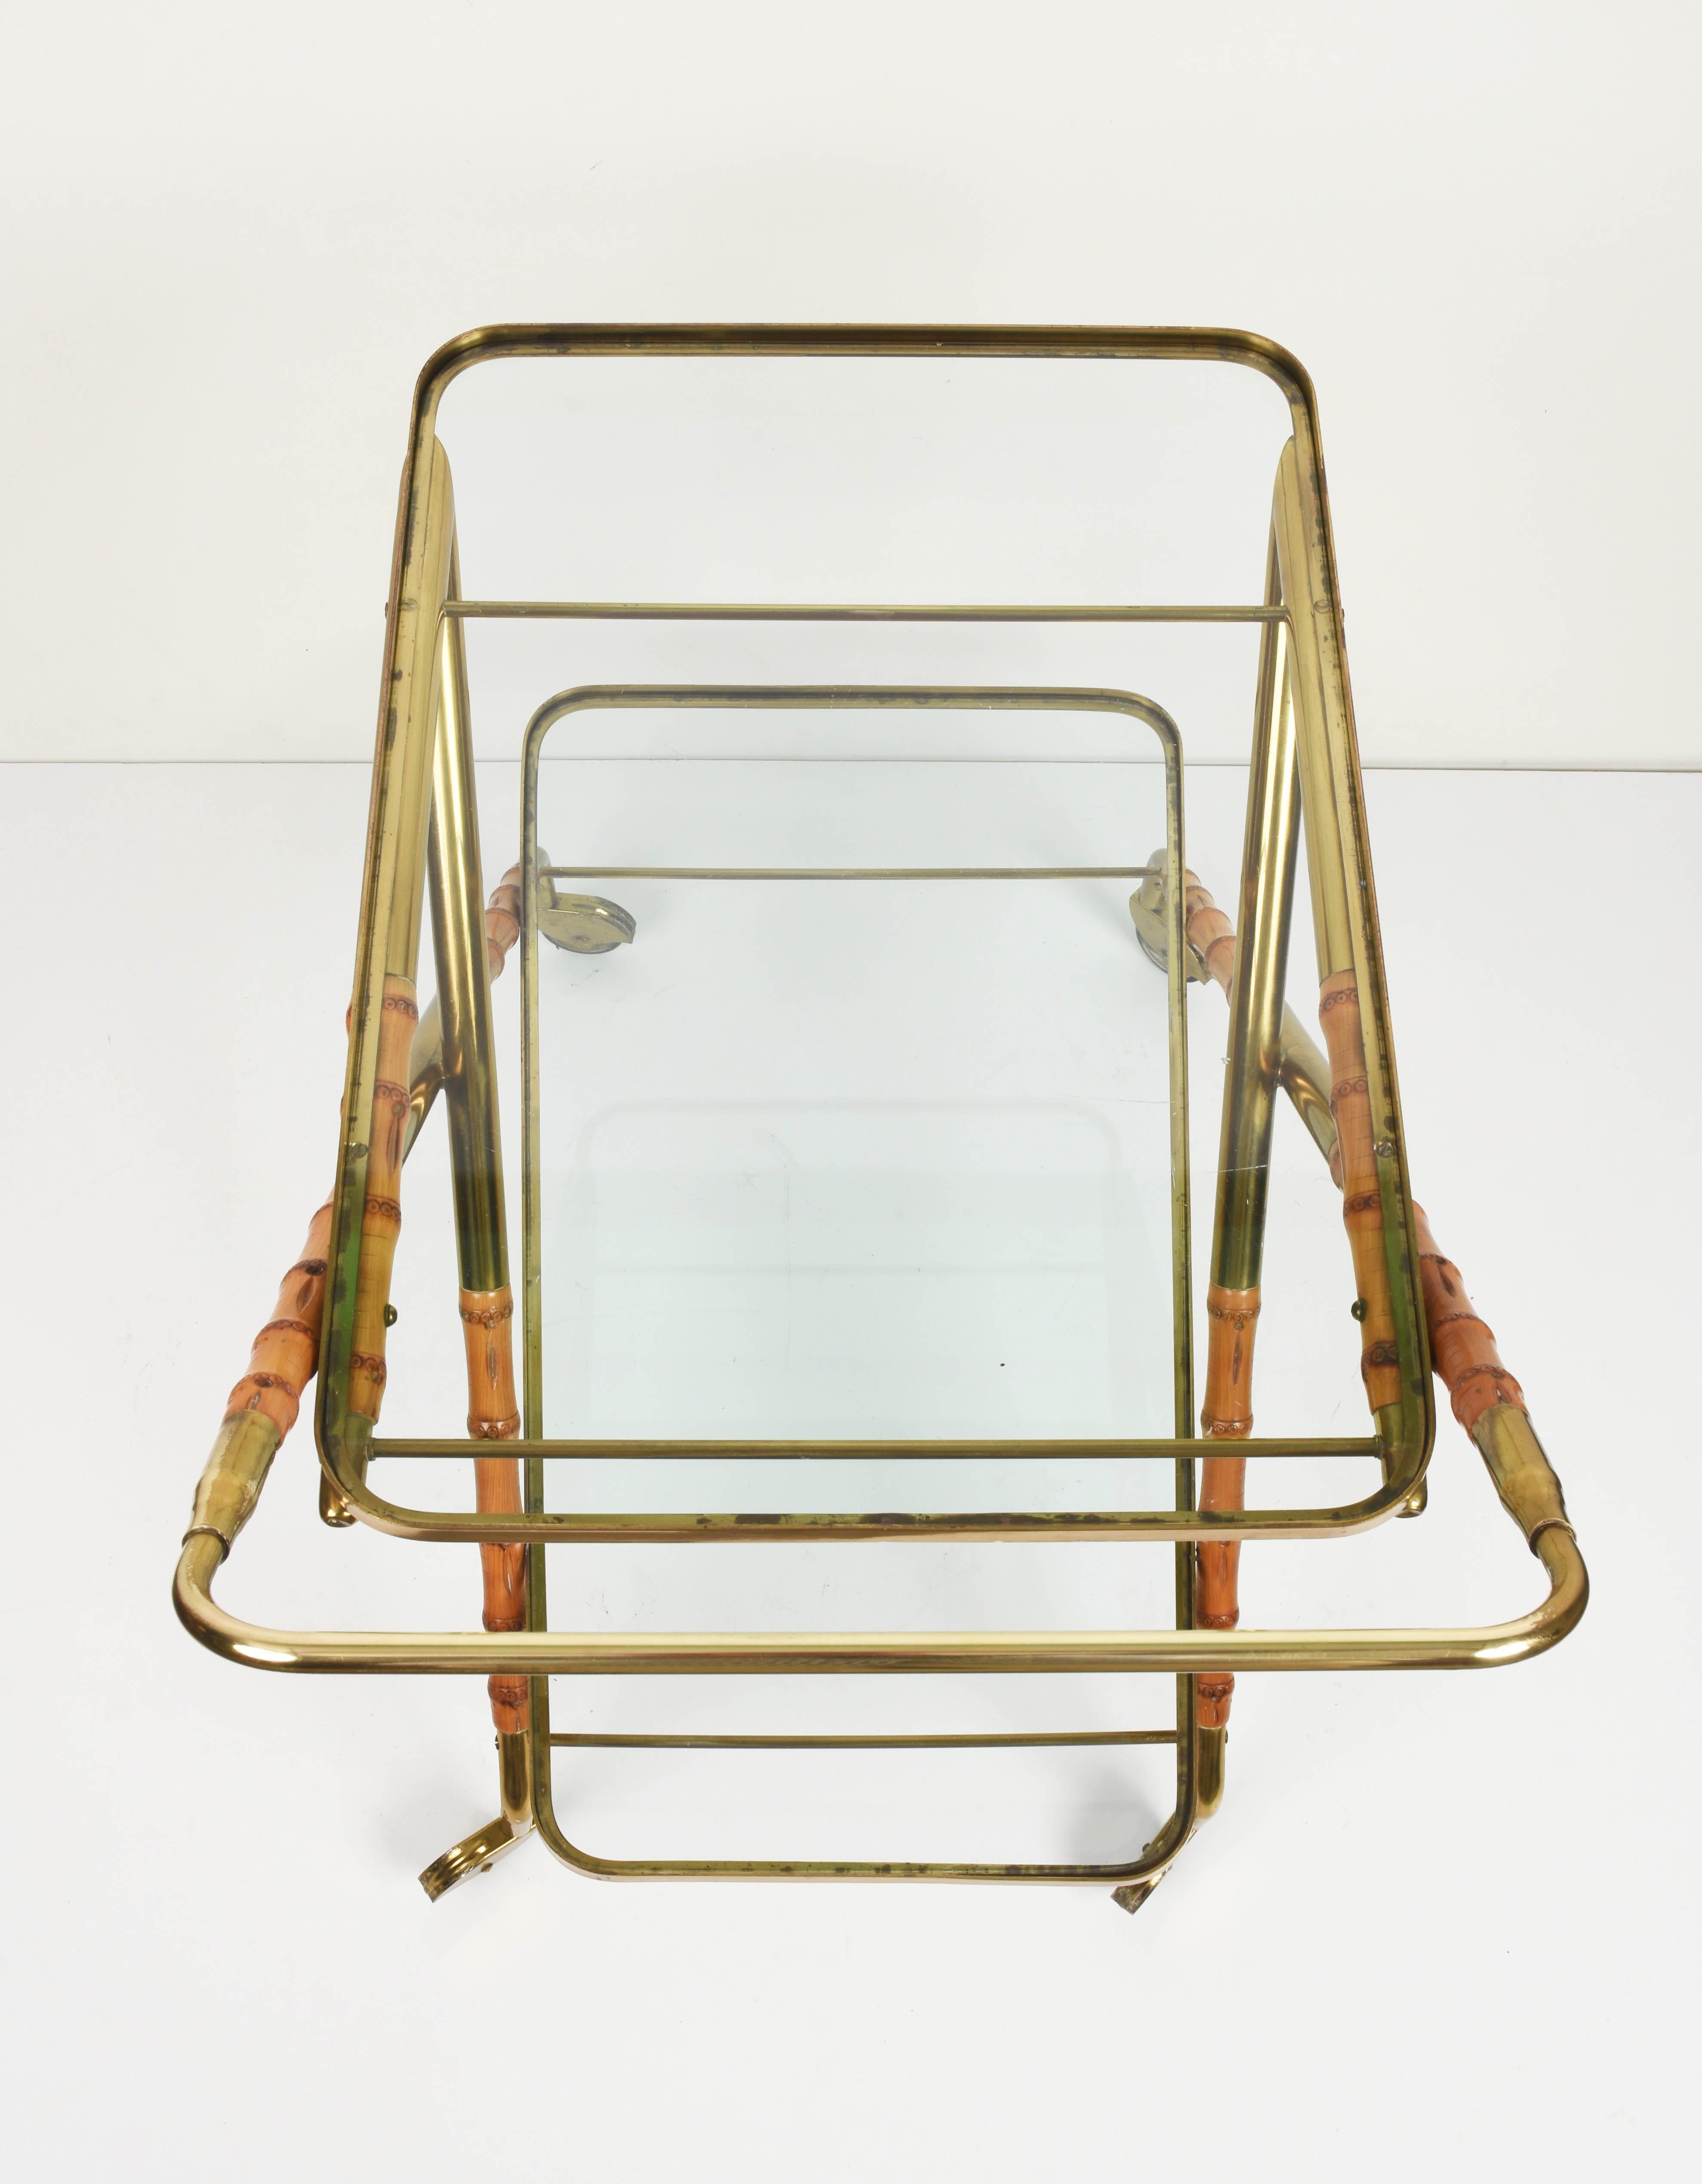 20th Century Lacca Midcentury Bamboo and Brass Italian Bar Cart with Glass Shelves, 1950s